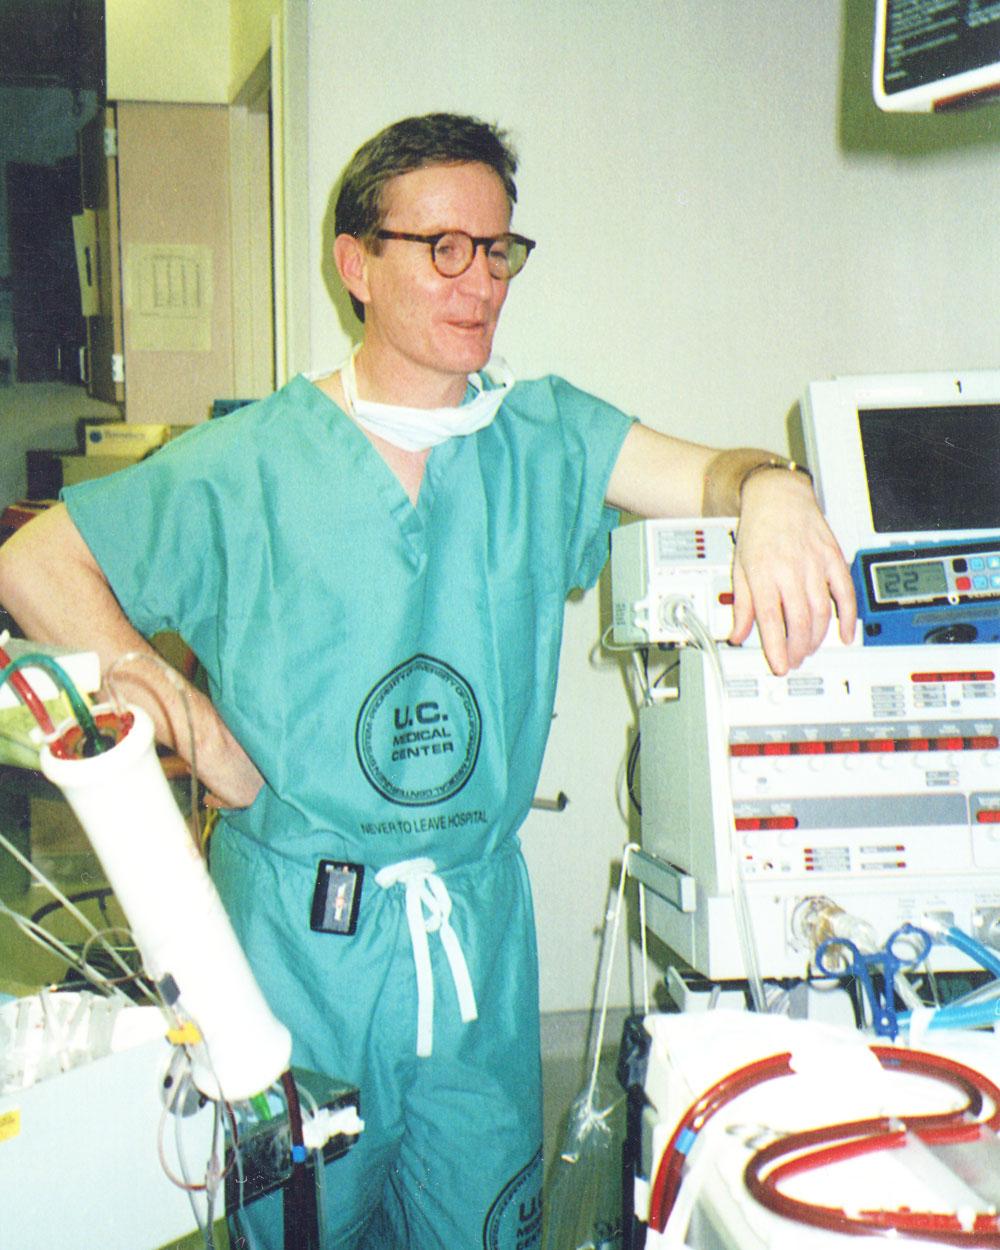 Sam Hawgood working in the intensive care nursery in 1997. He started his career at UCSF in 1984 as a fellow in neonatology.